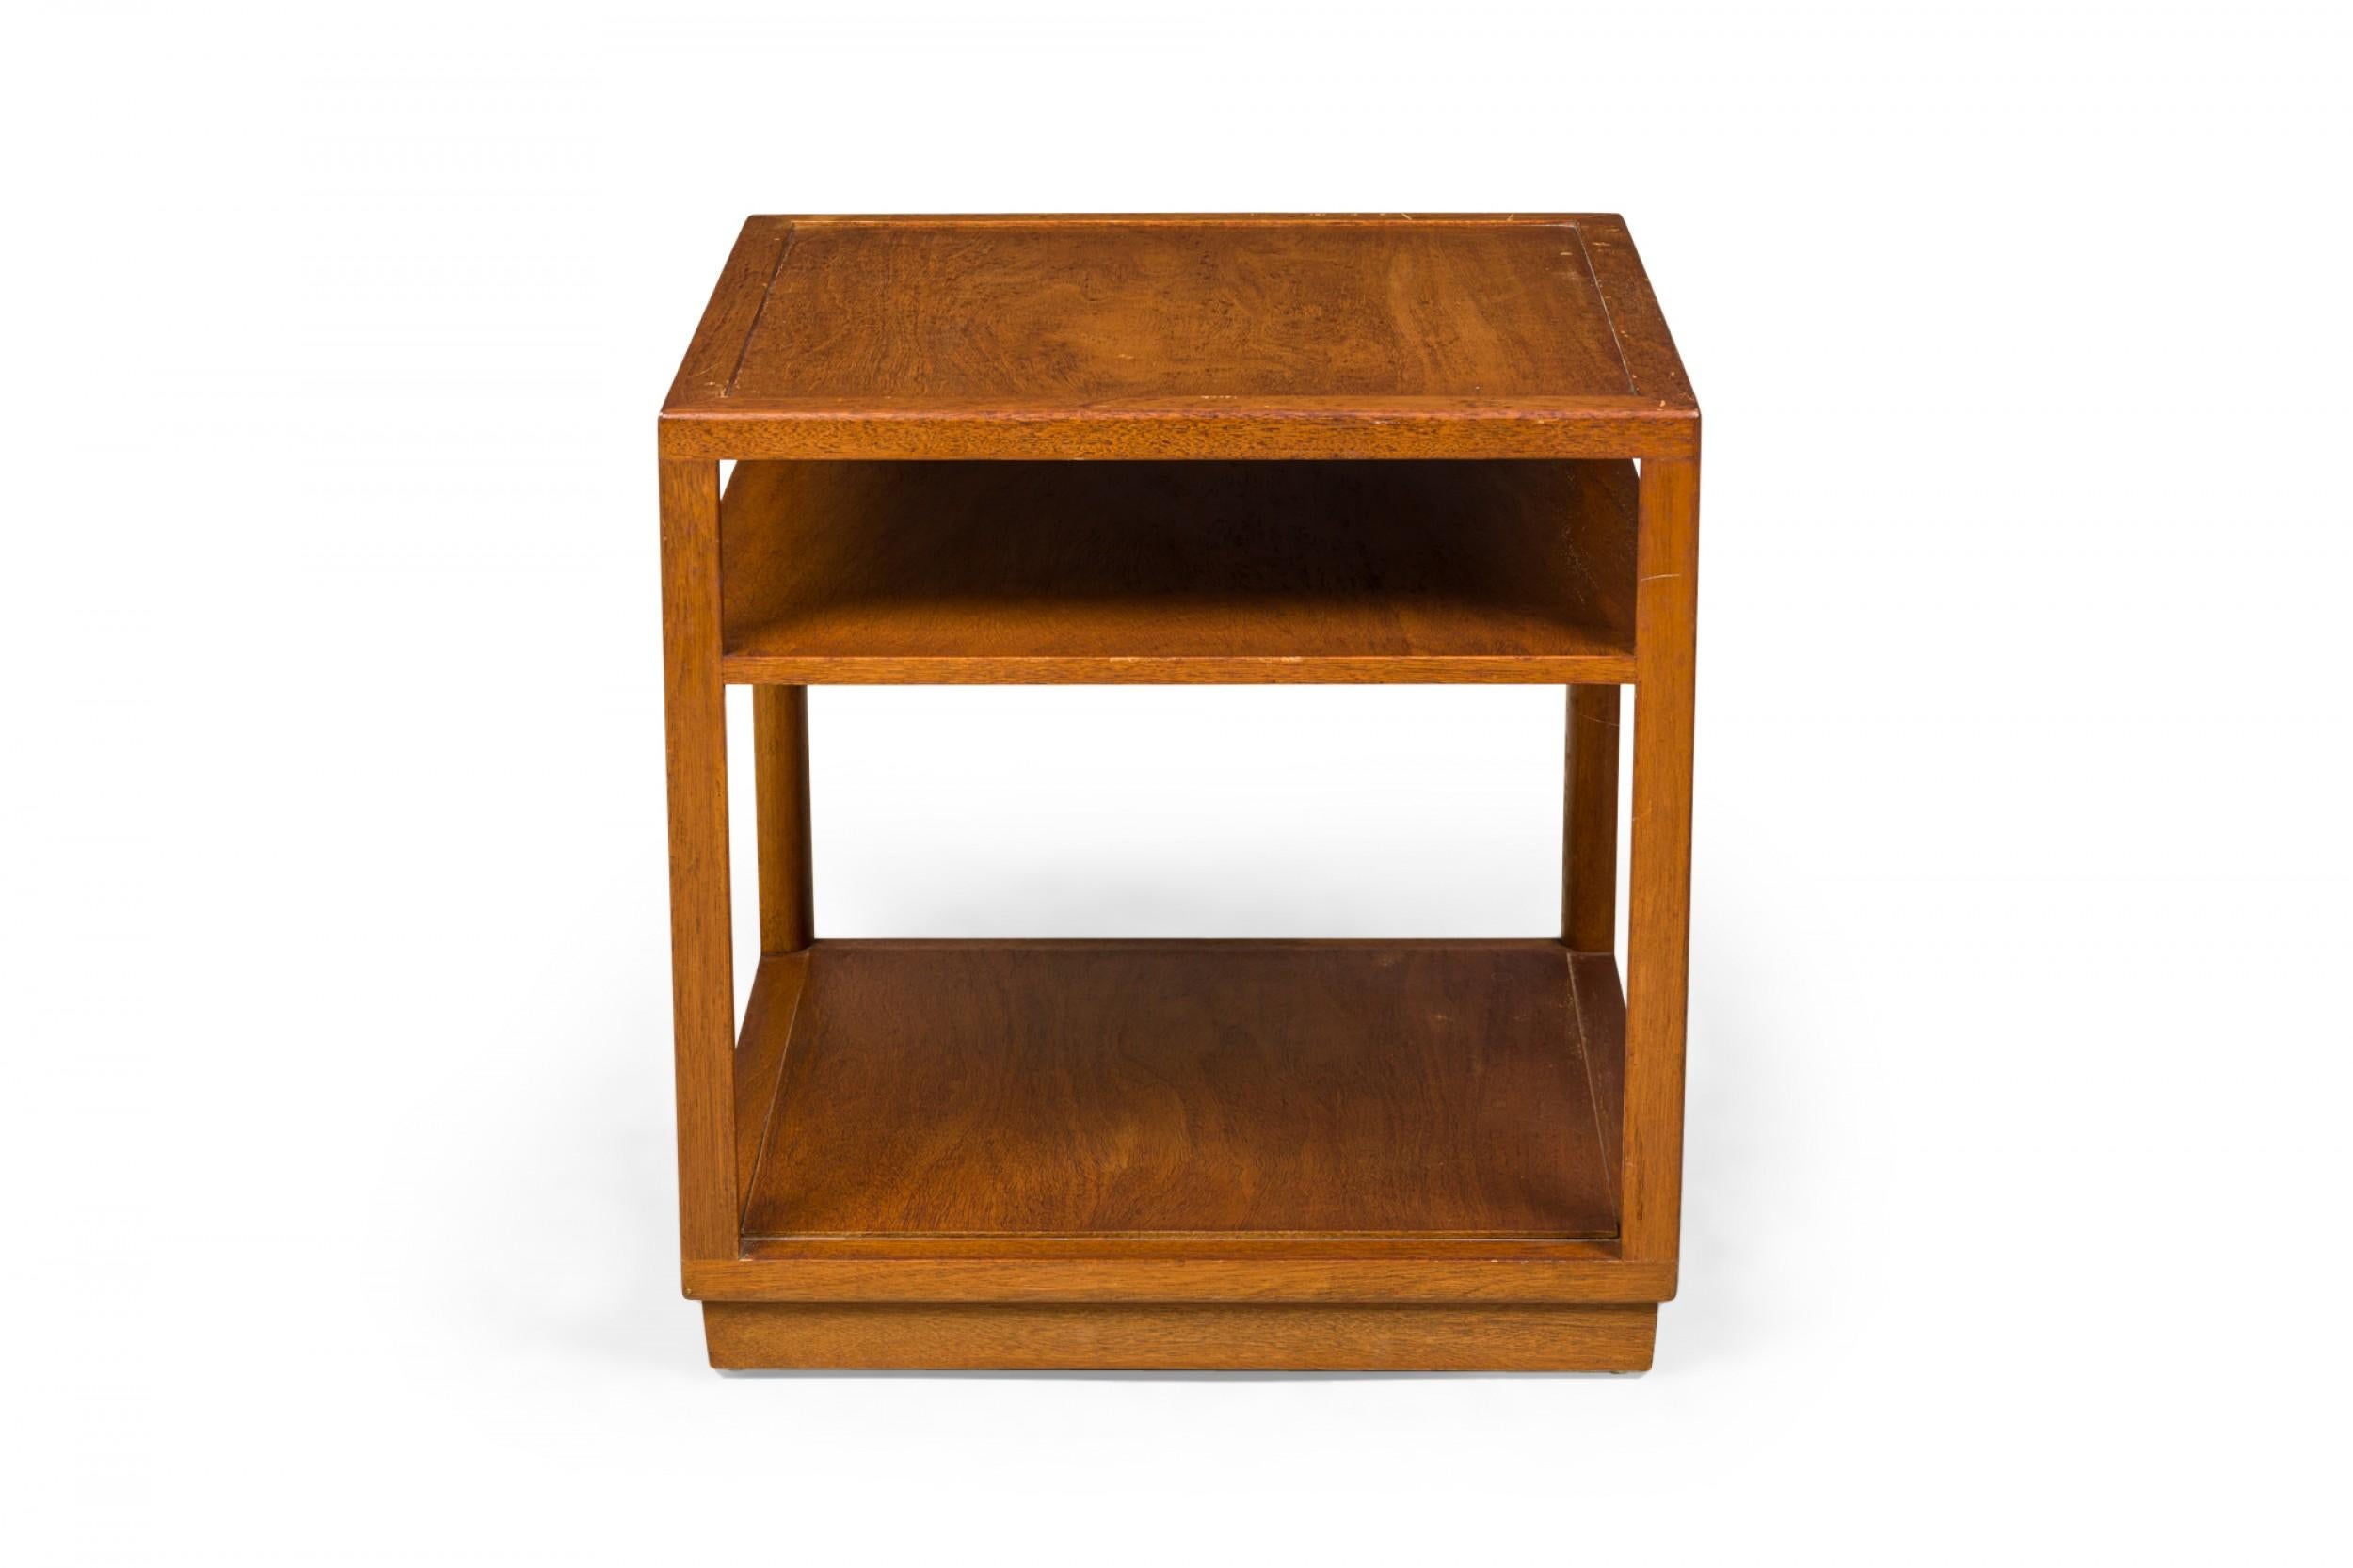 American Mid-Century square wooden end / side table with an open shelf below the square top, resting on a solid stepped base that creates as a taller lower shelf. (EDWARD WORMLEY FOR DUNBAR FURNITURE COMPANY)(Similar tables: DUF0649, DUF0650)
